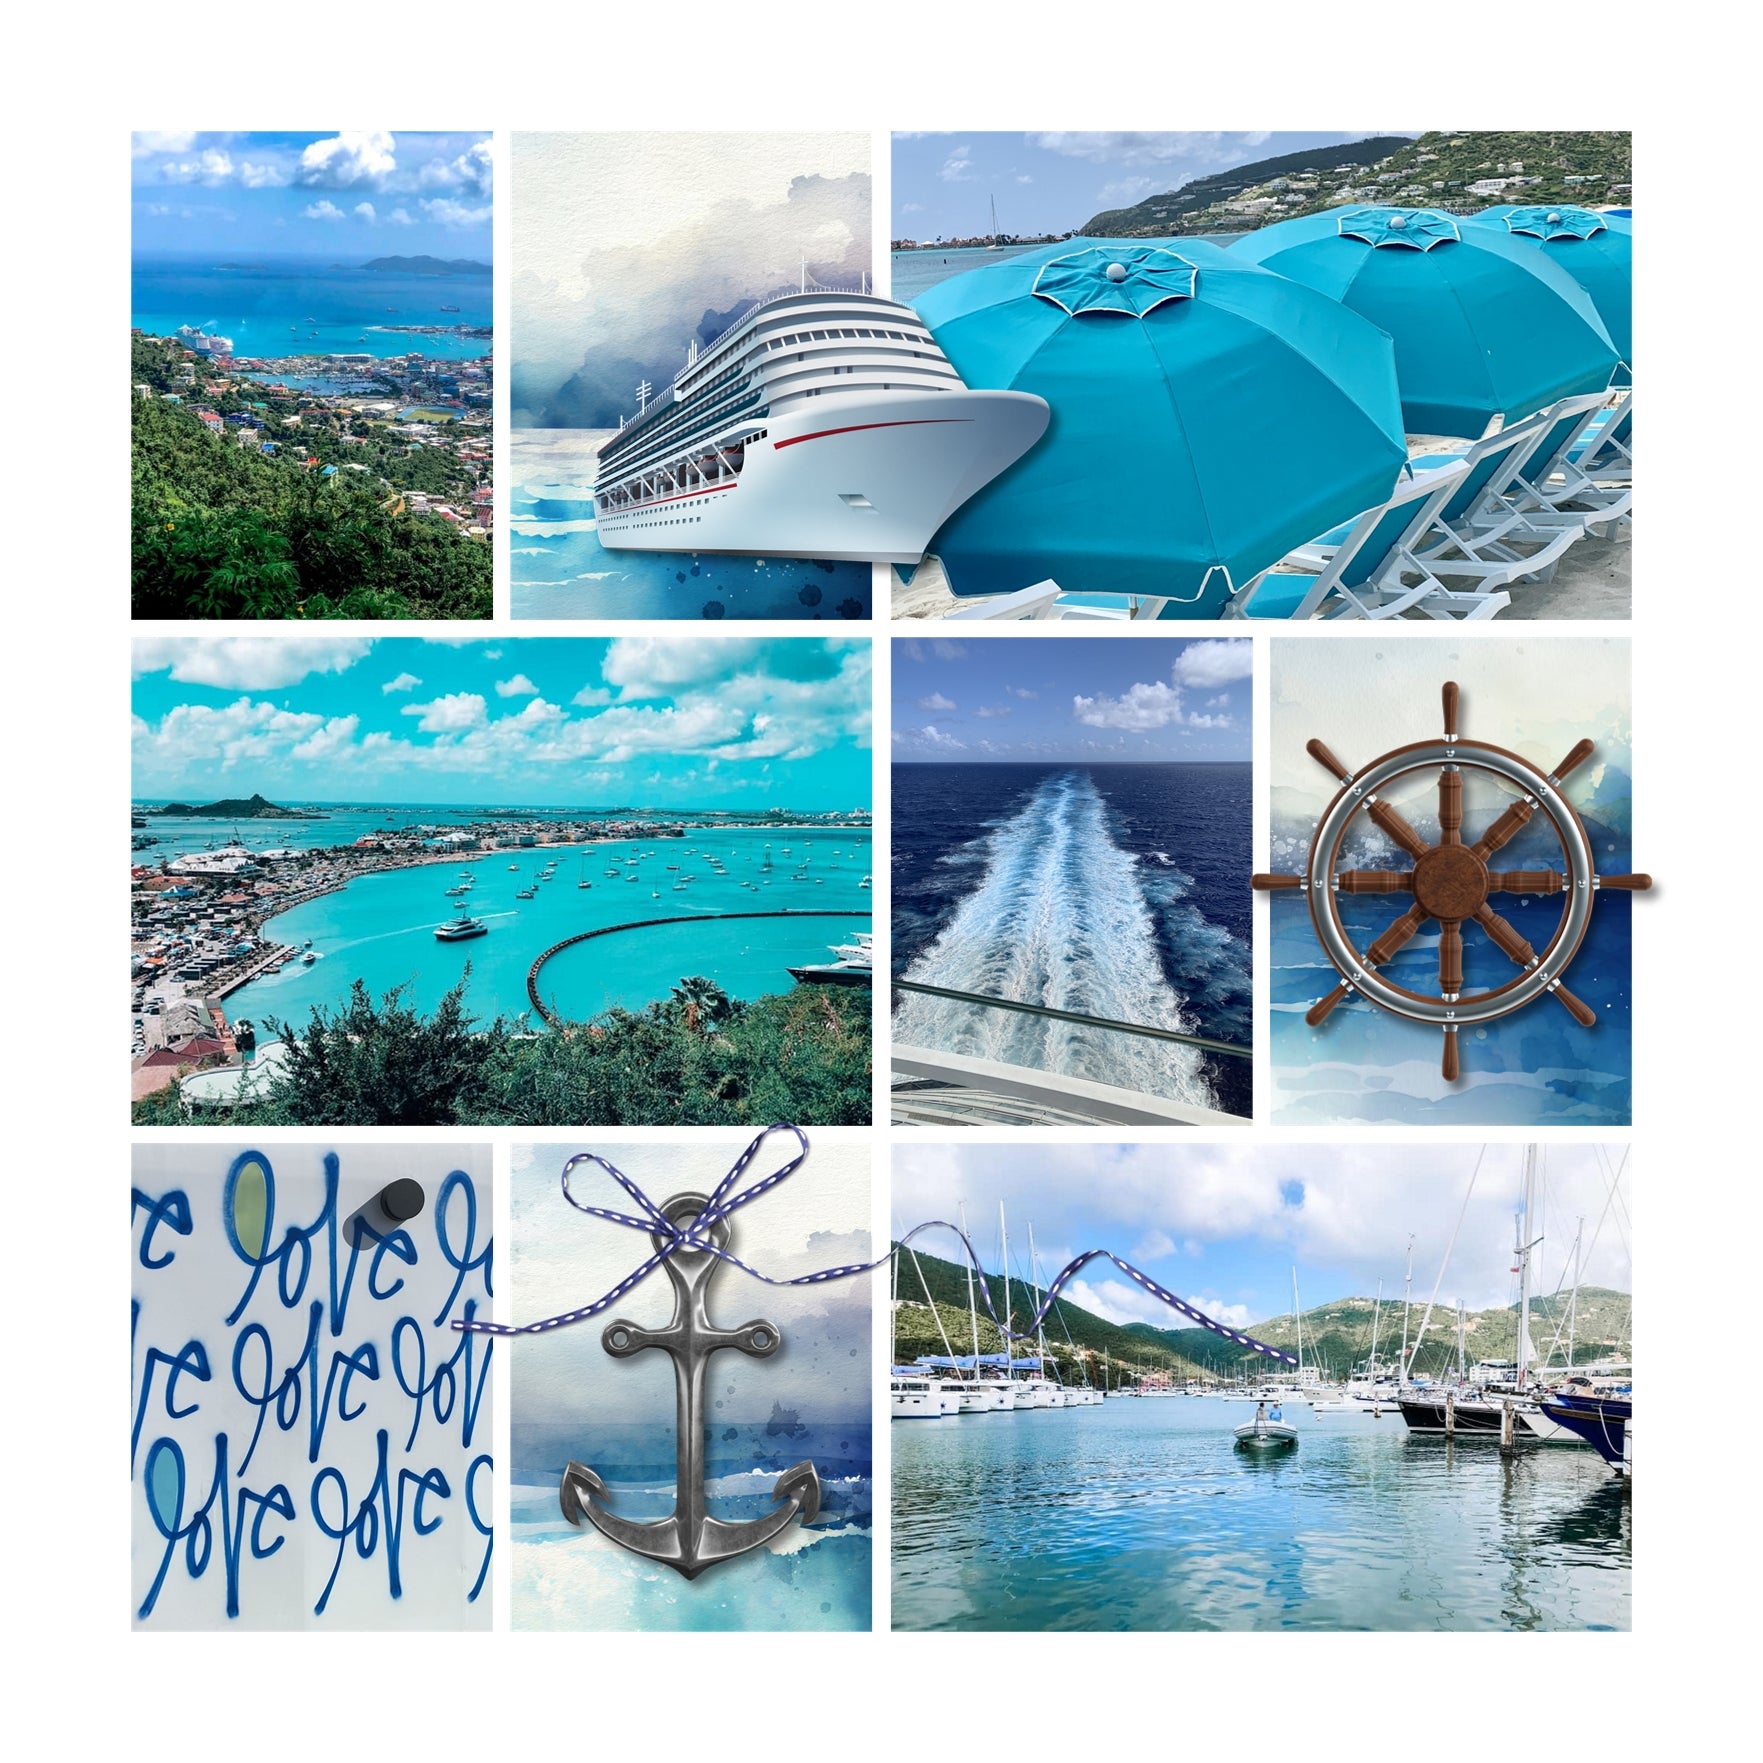 Highlight your tropical vacation and cruise ship memories with these beautiful realistic digital embellishments, watercolor papers, frames, water splashes, signage, and more by Lucky Girl Creative. Great for holidays to Hawaii, the Caribbean, Florida, California, cruise ship adventures, and beach vacations.